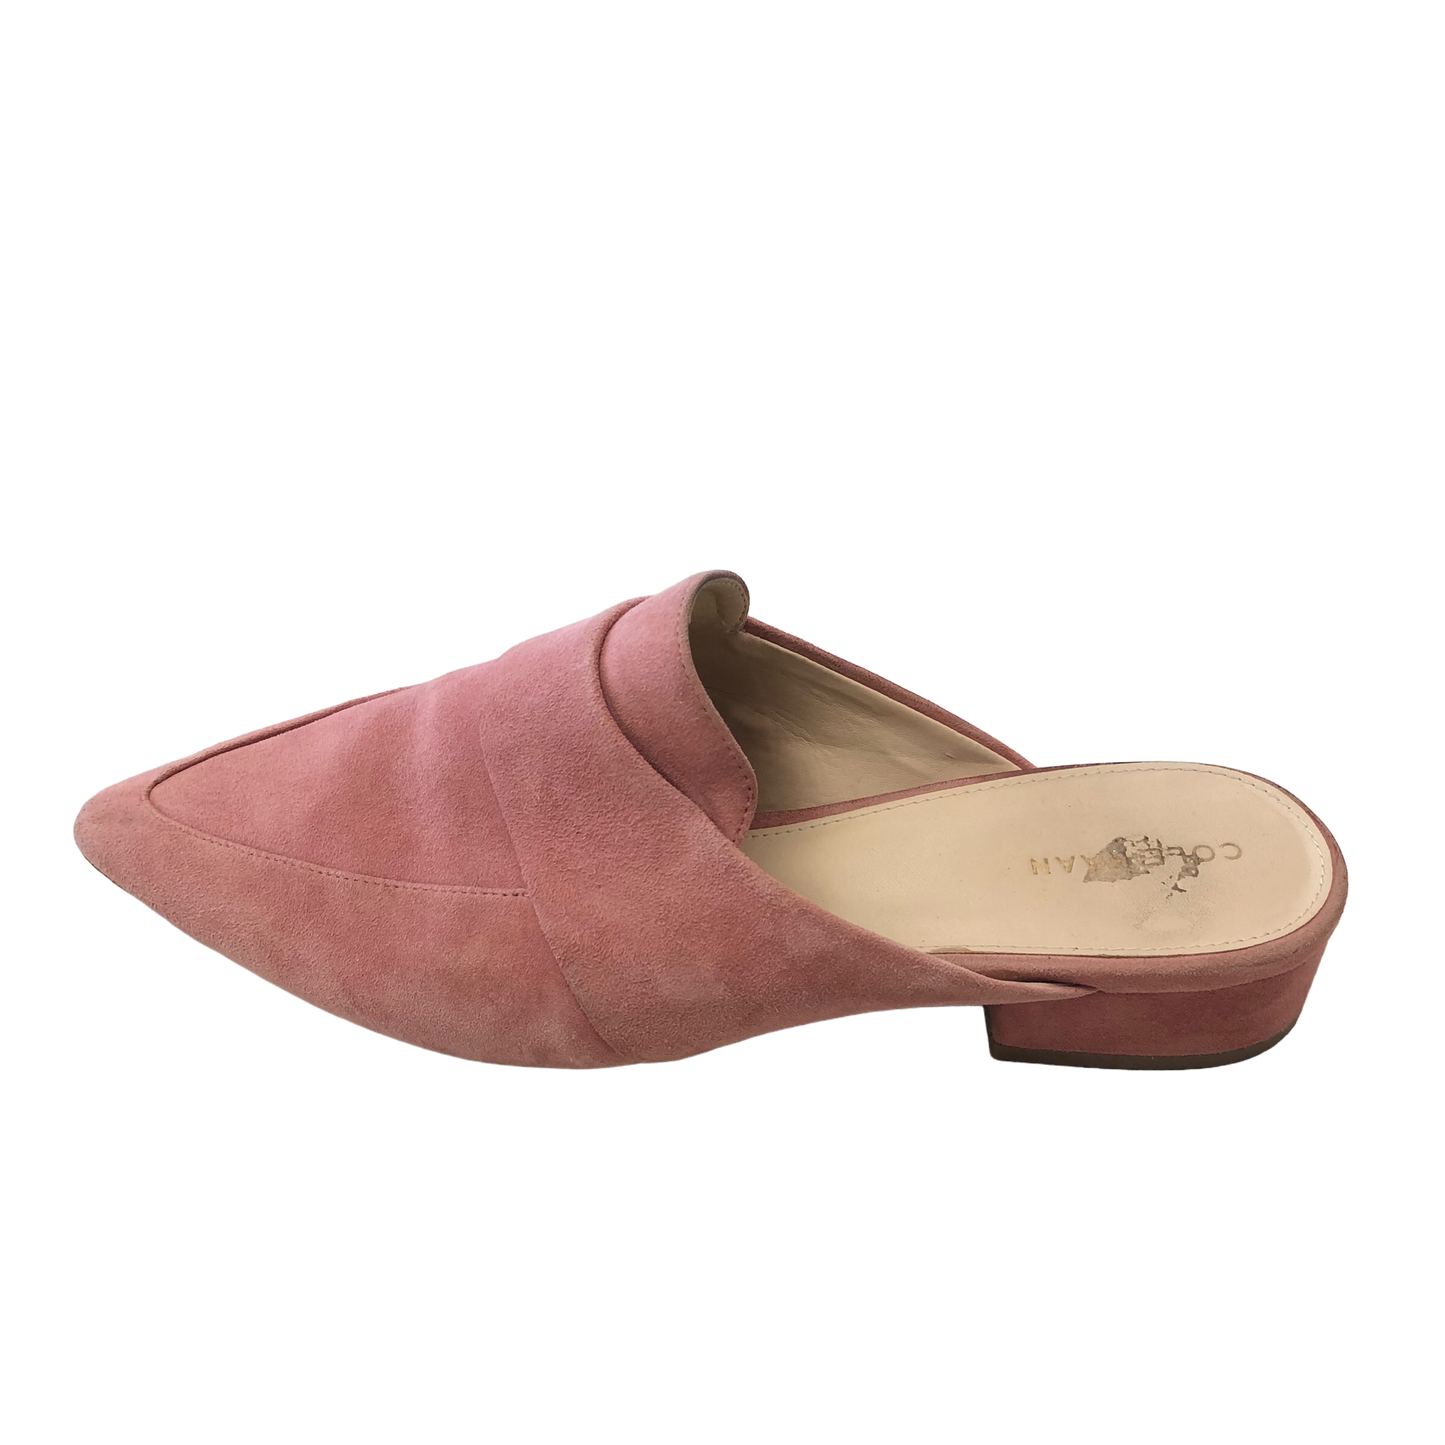 Pink Shoes Flats Cole-haan, Size 8